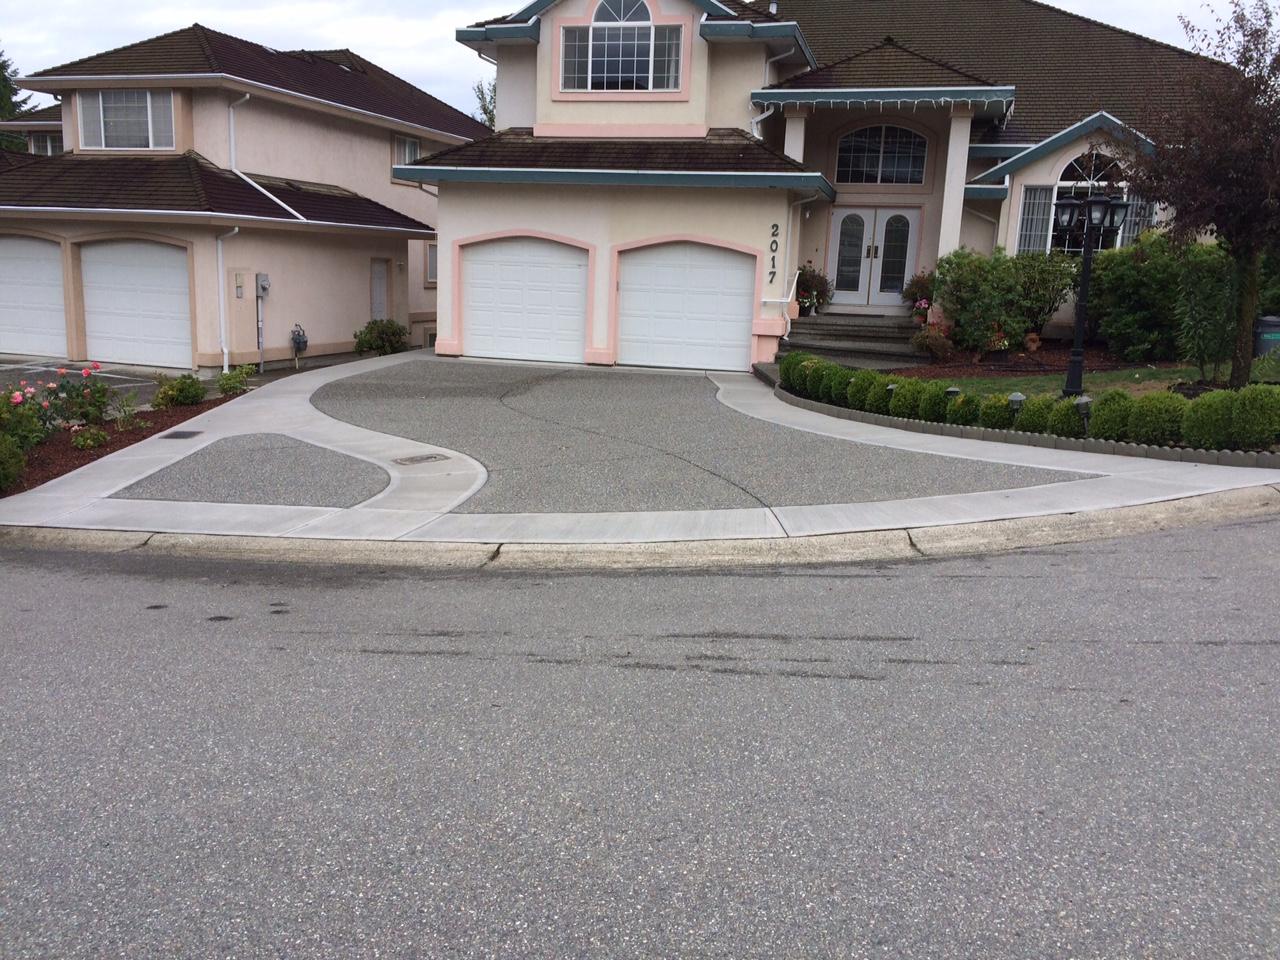 Exposed-Concrete-Driveway-Expansion-After-Tree-Removal